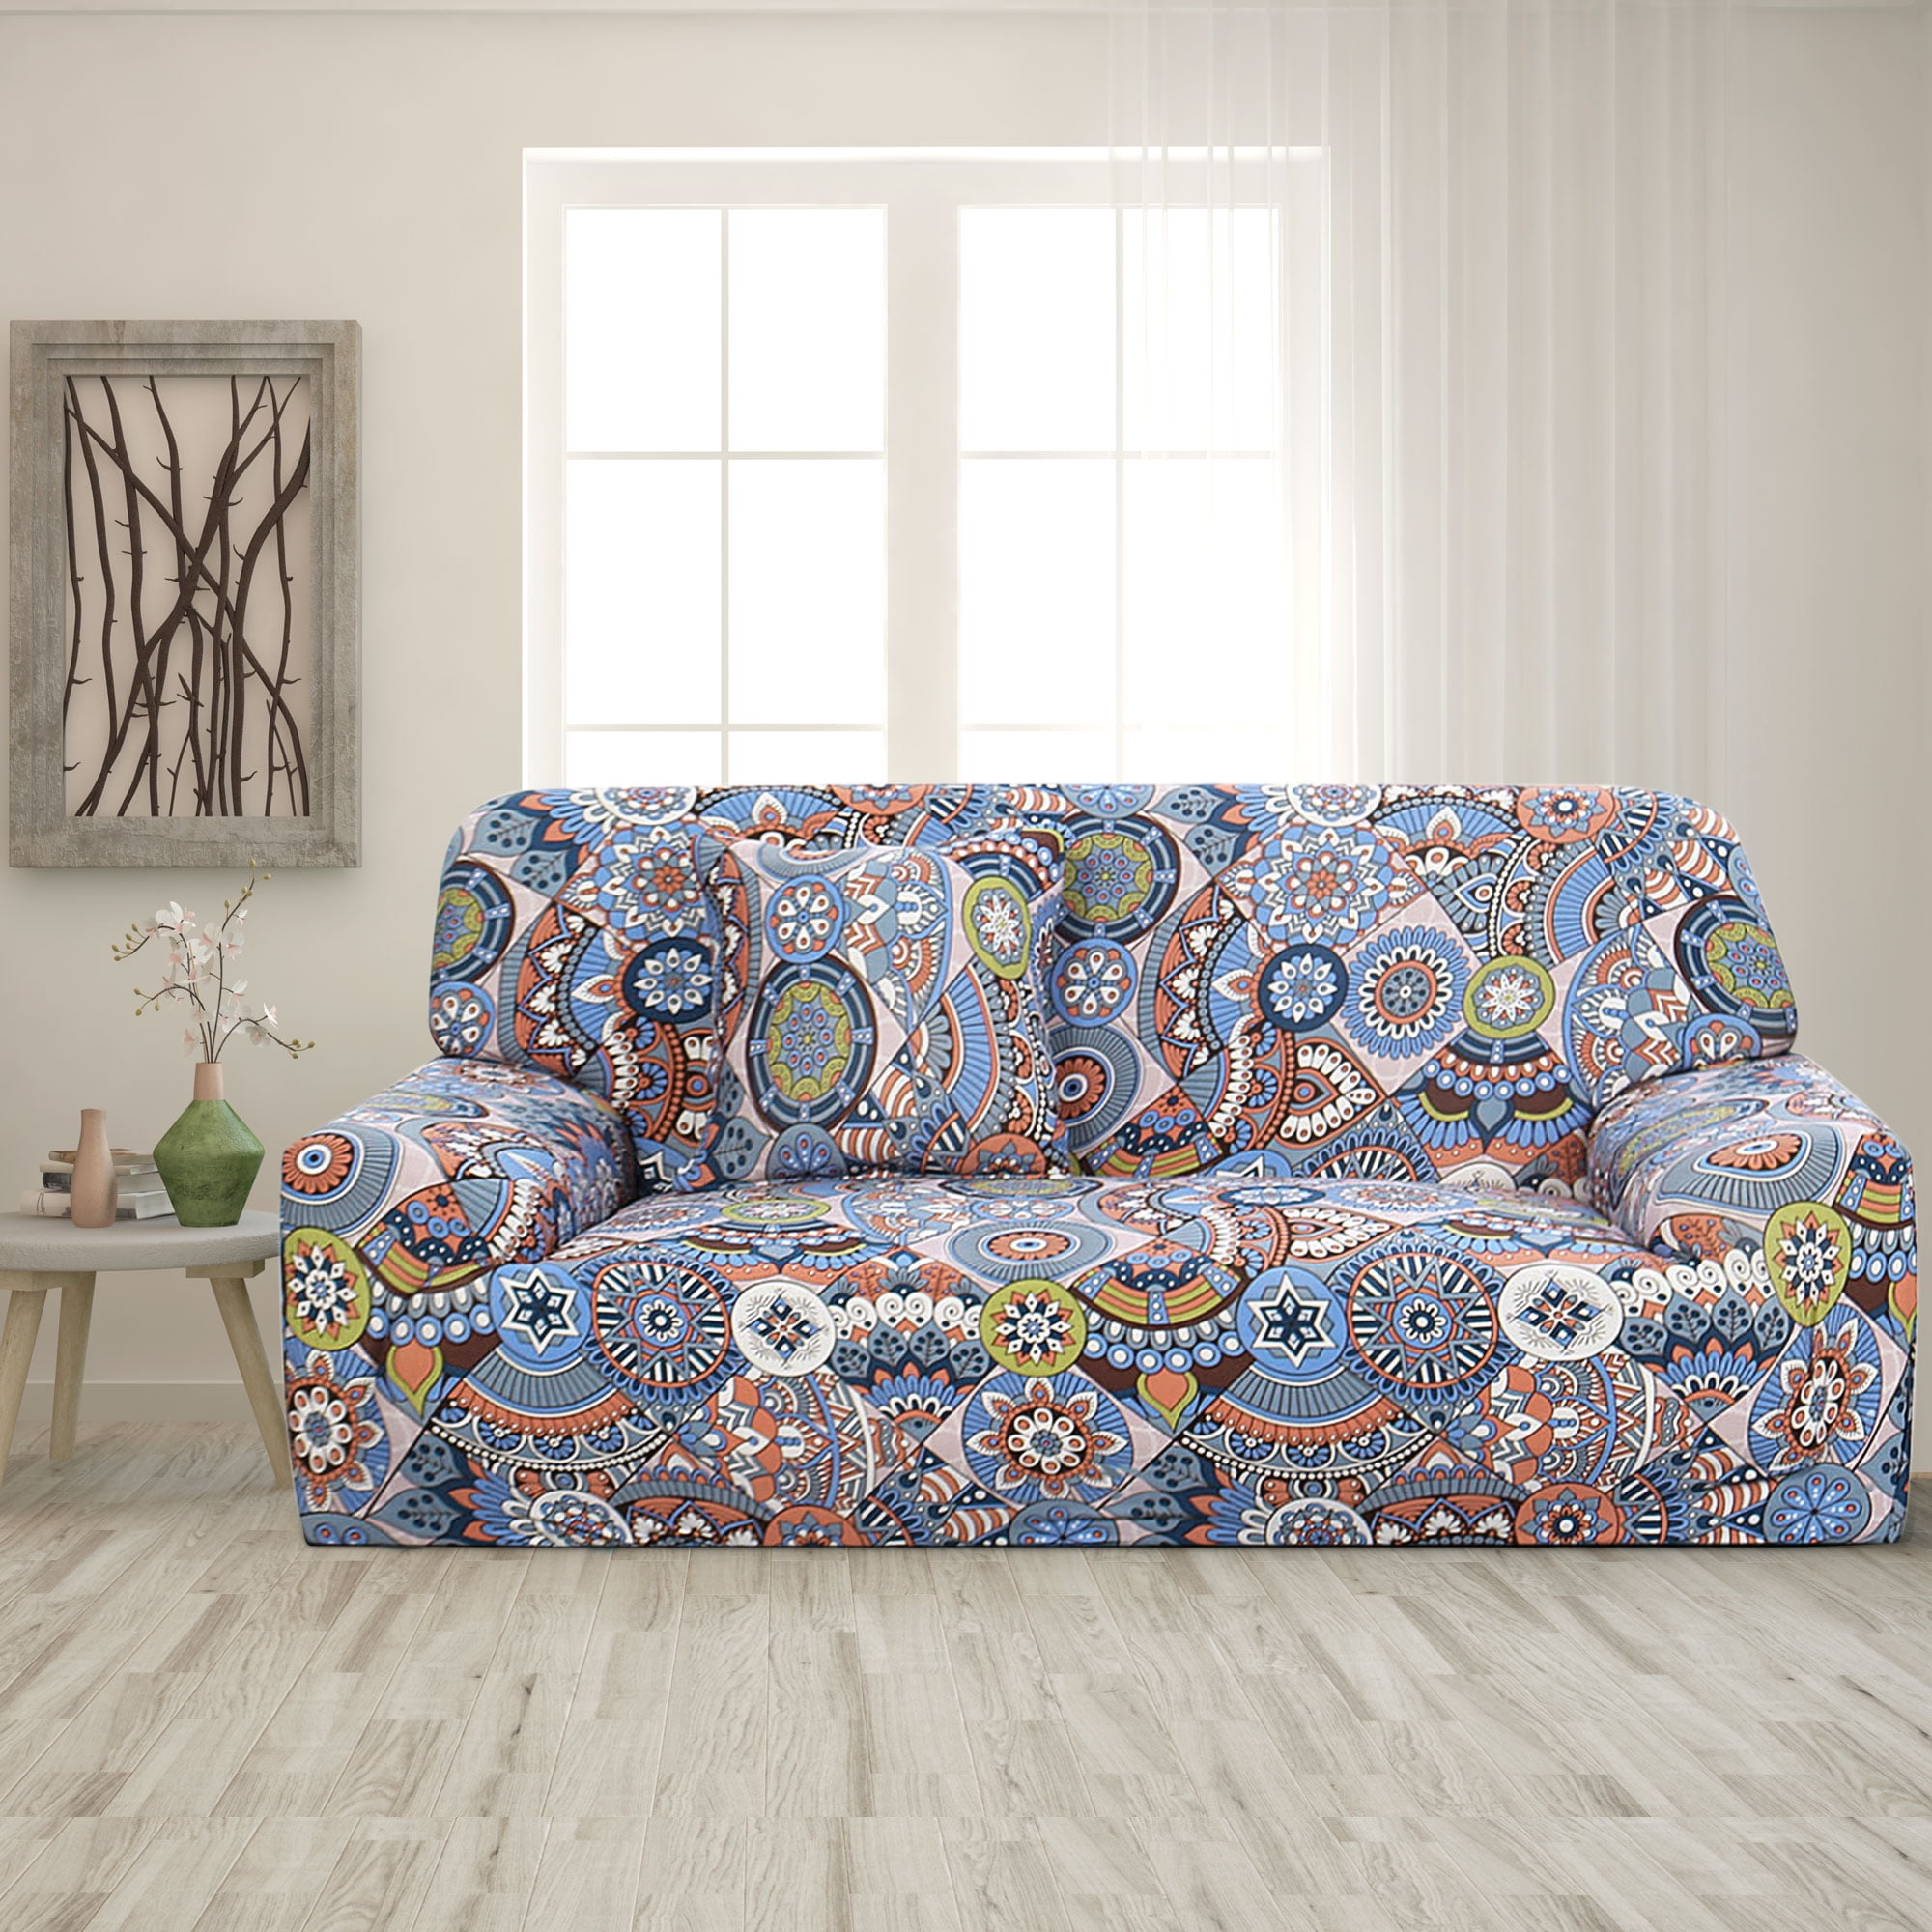 Details about   1234 Floral Elastic Sofa Cover Slipcover Stretch Couch Furniture Chair Protector